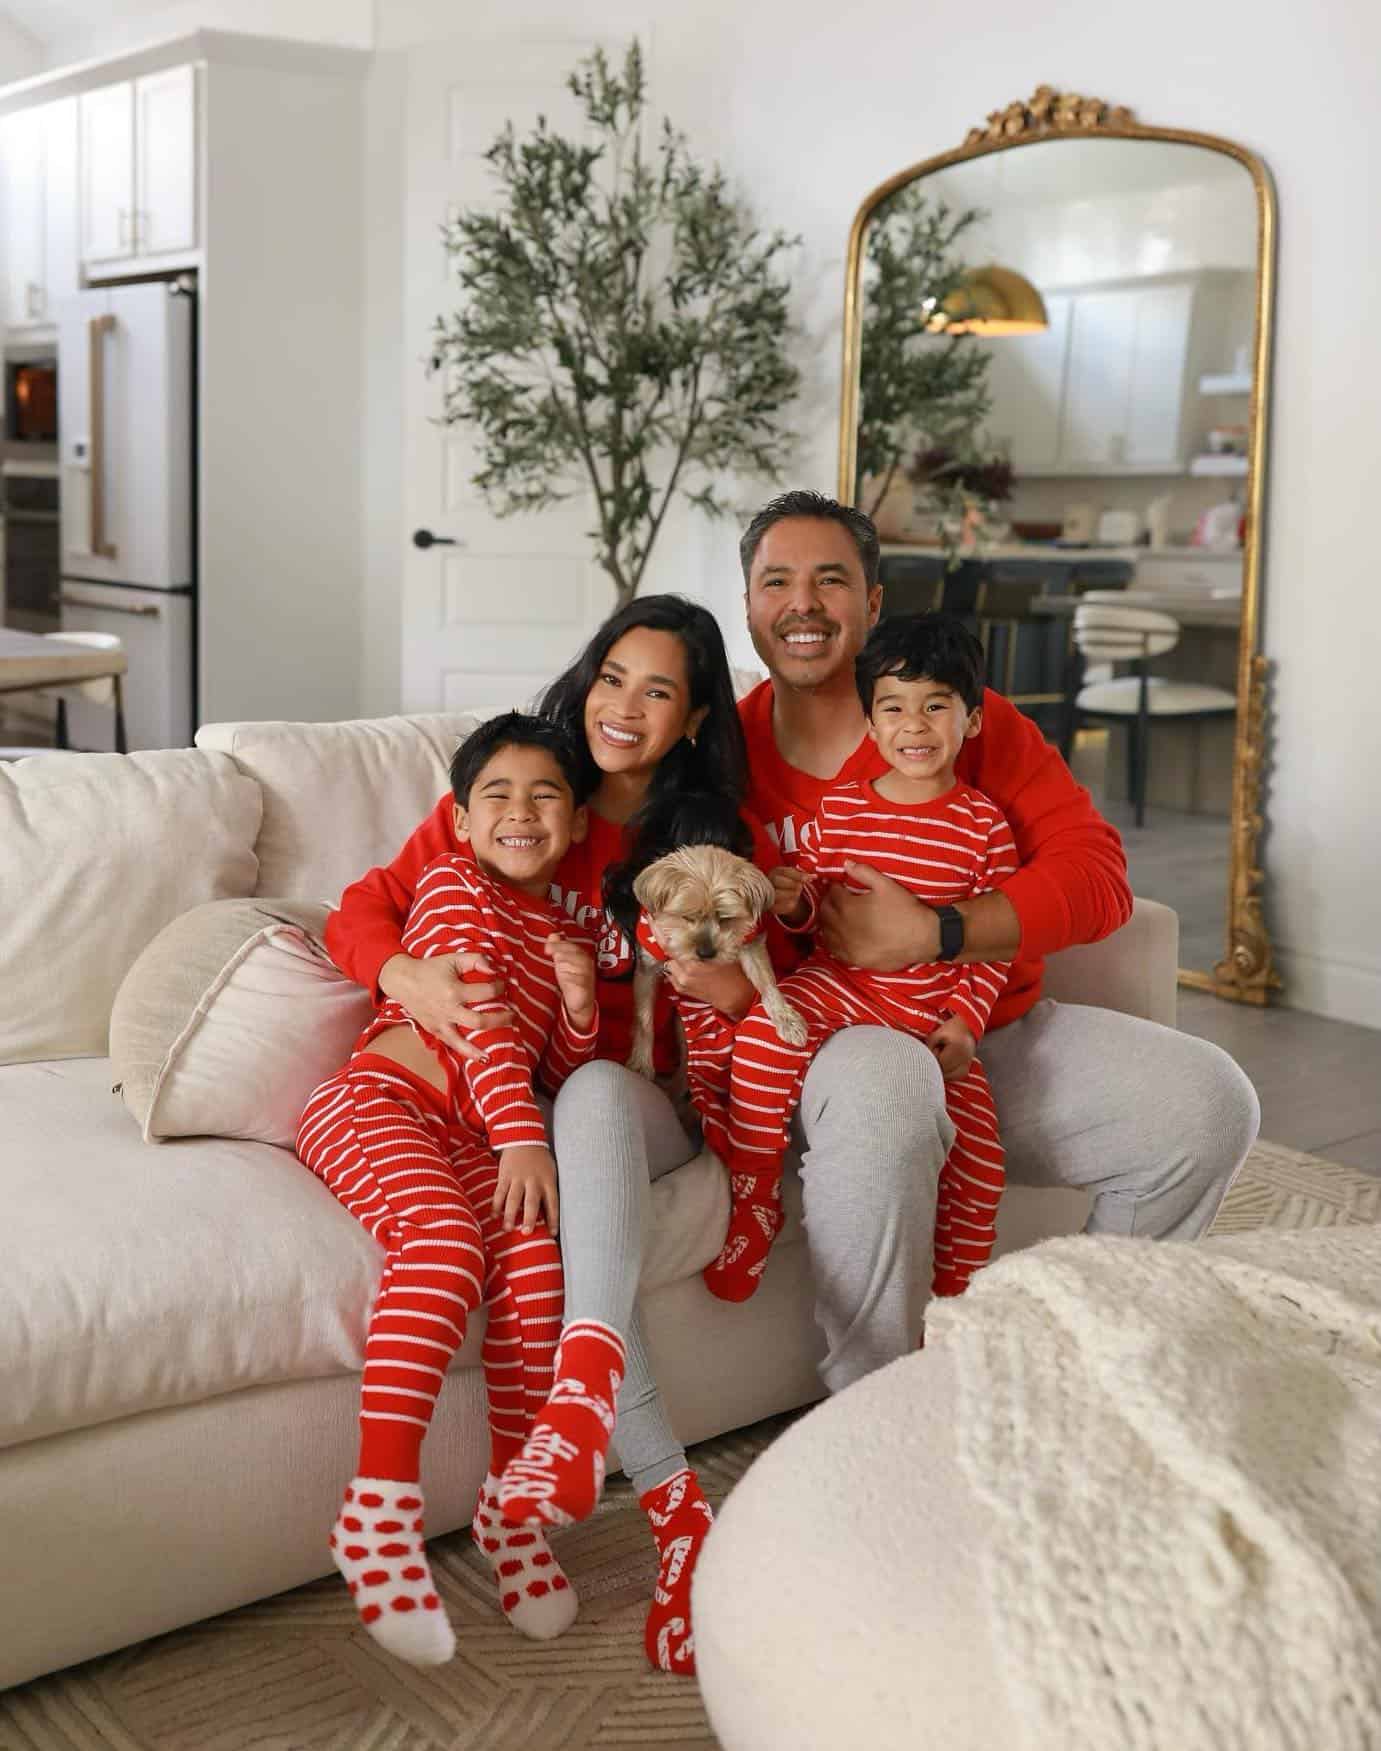 A family photo with a family of four and their dog wearing matching red, white, and grey Christmas pajamas